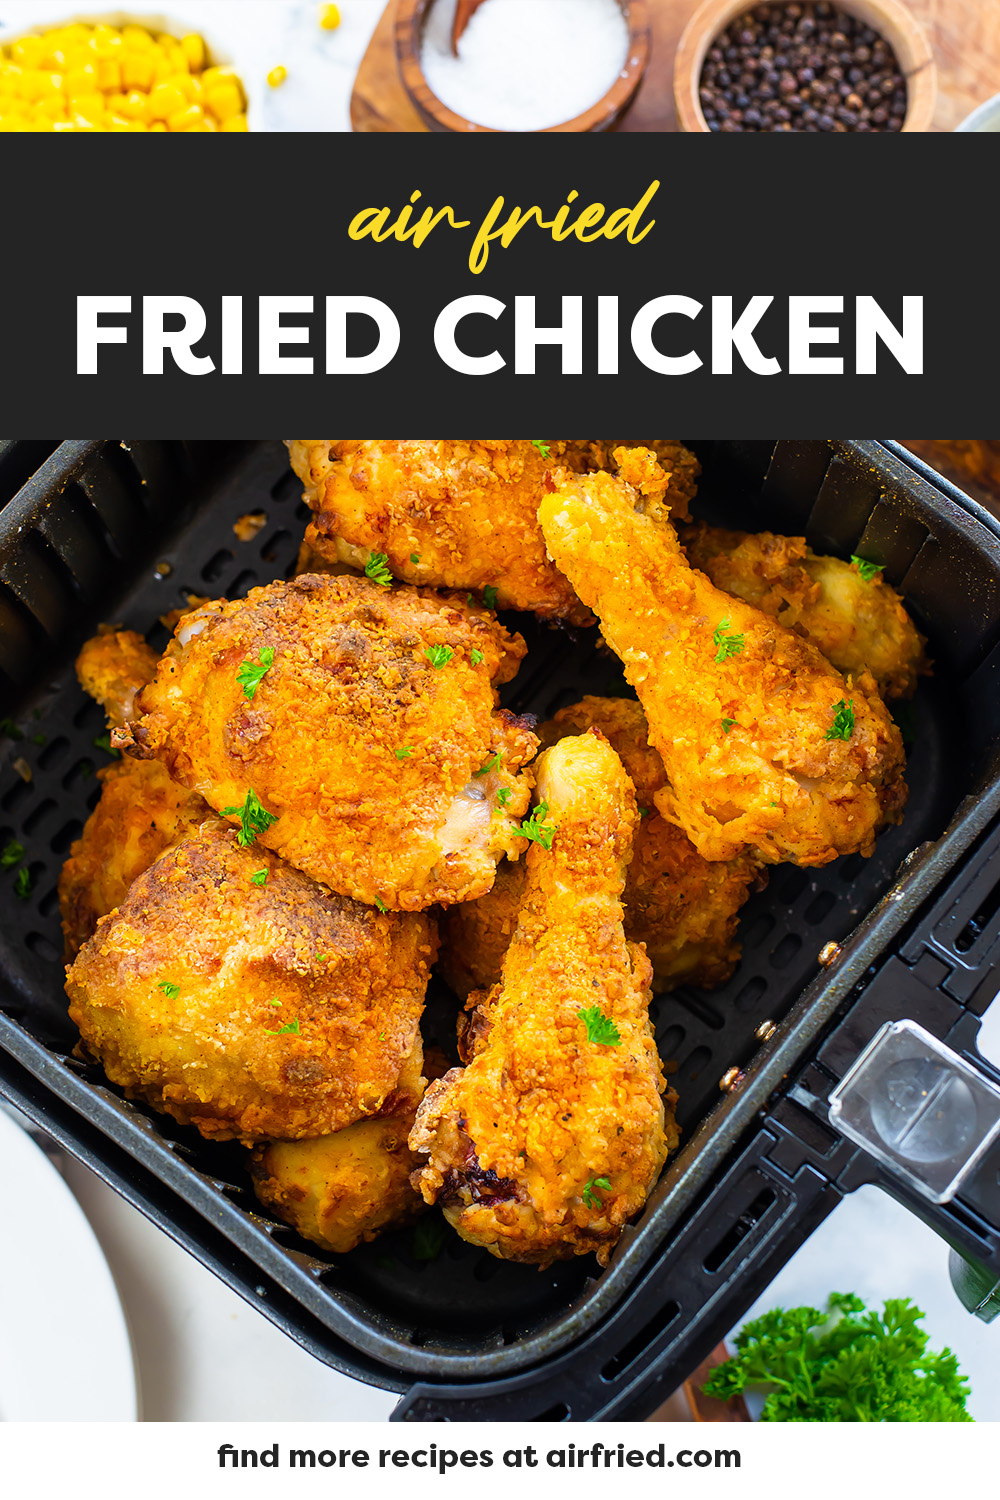 Crispy fried chicken as regularly easy to get with your air fryer!  The results of this recipe are wonderfully crispy breading on a very tender chicken!